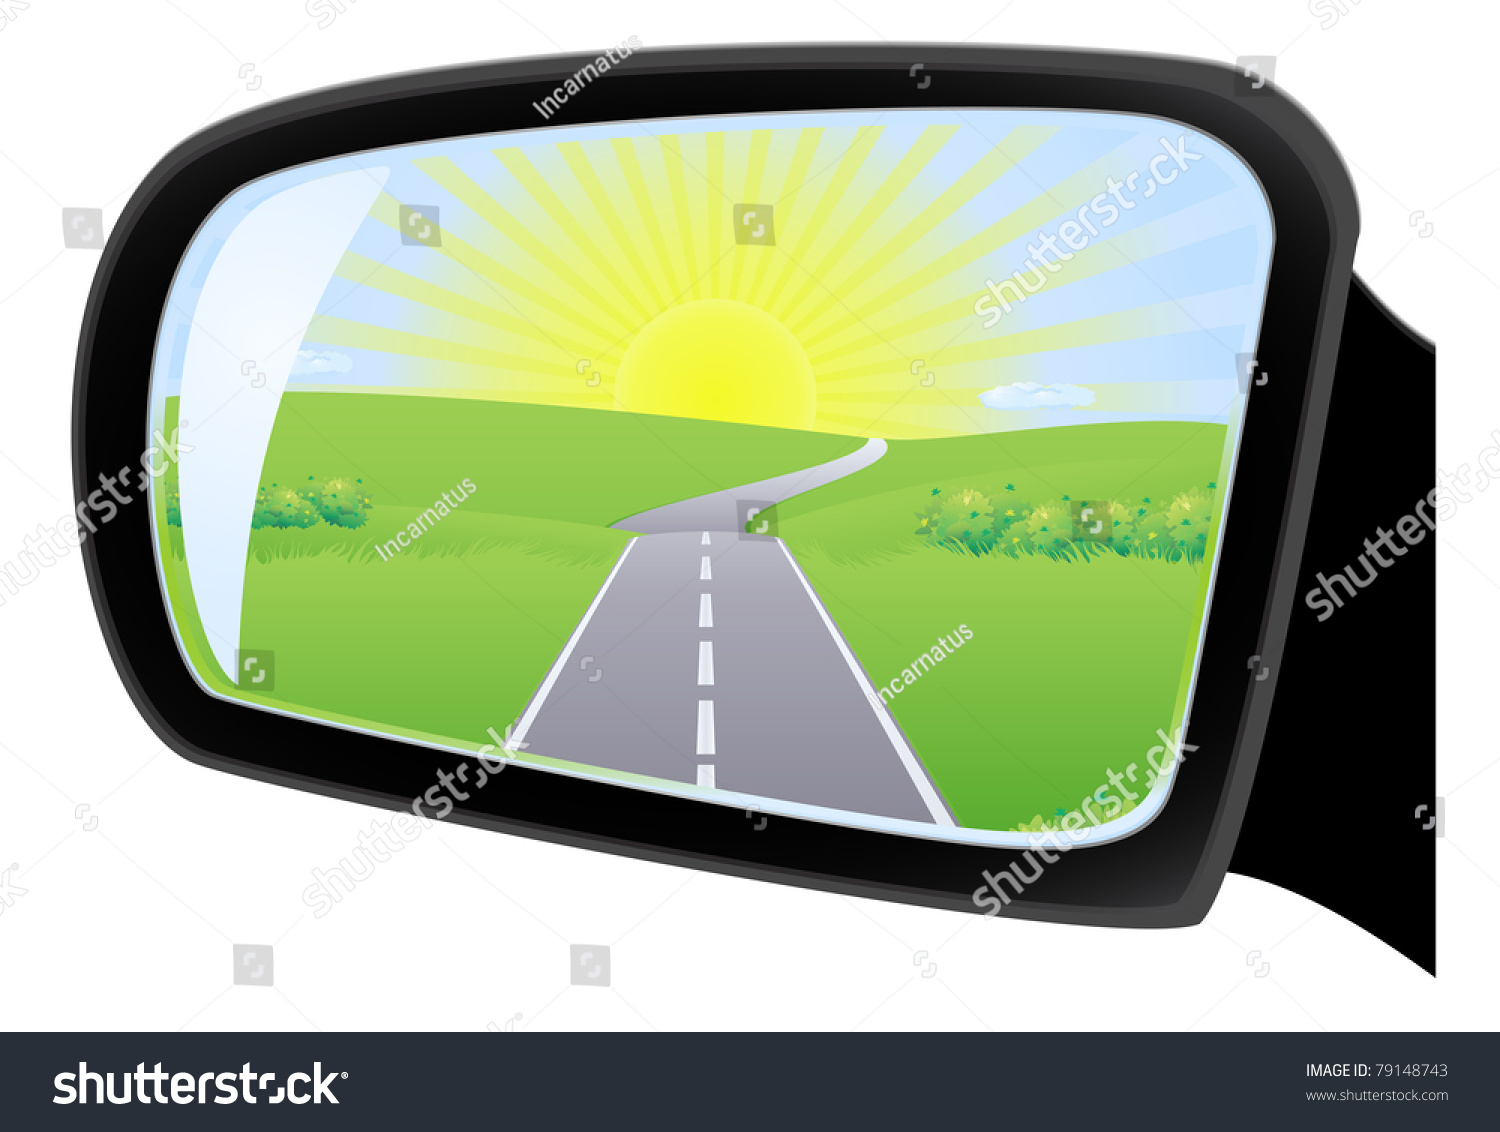 Image result for CLIP ART OF REAR VIEW MIRROR